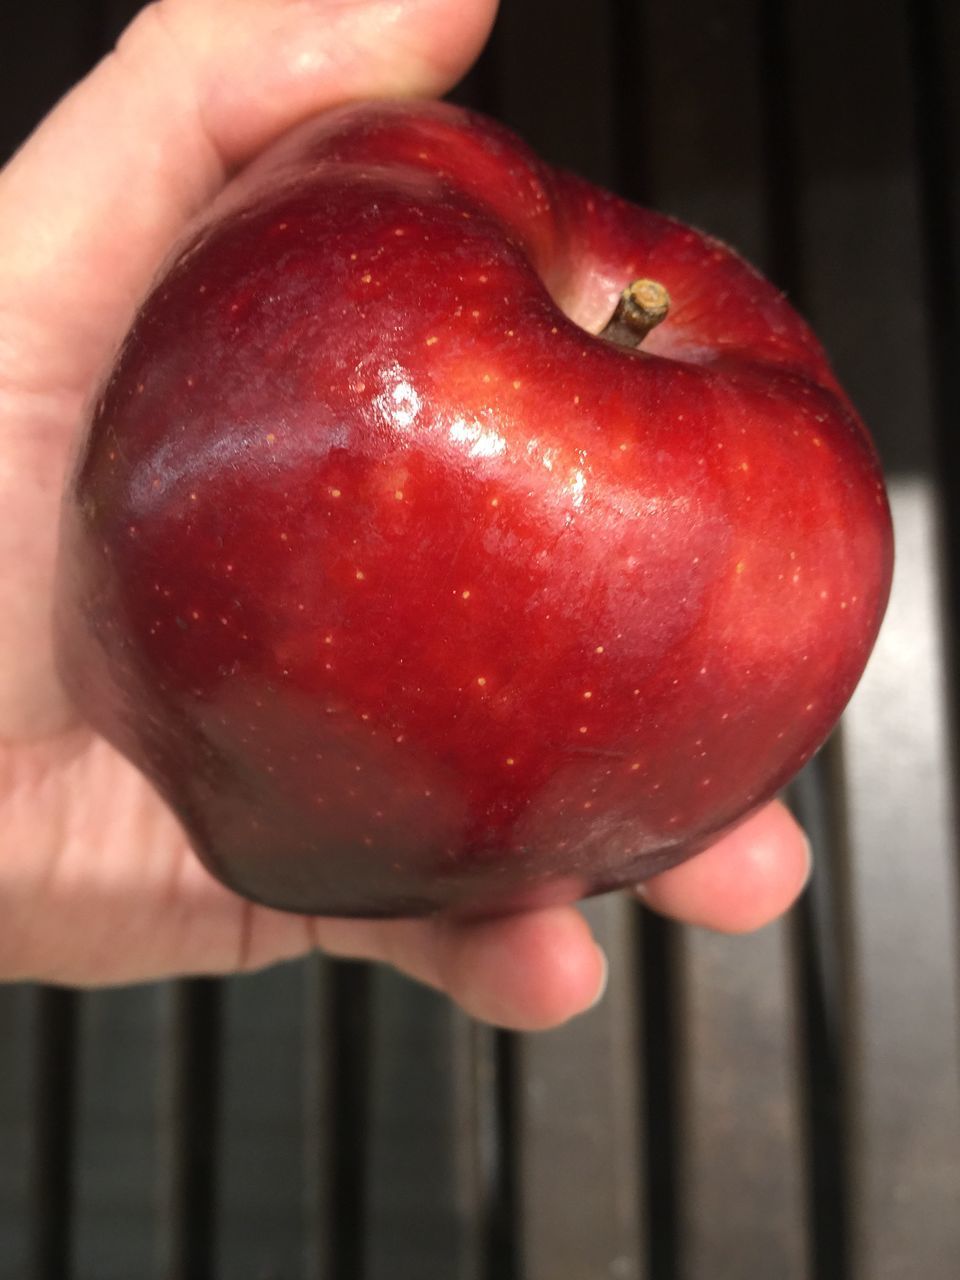 CLOSE-UP OF PERSON HAND HOLDING APPLE